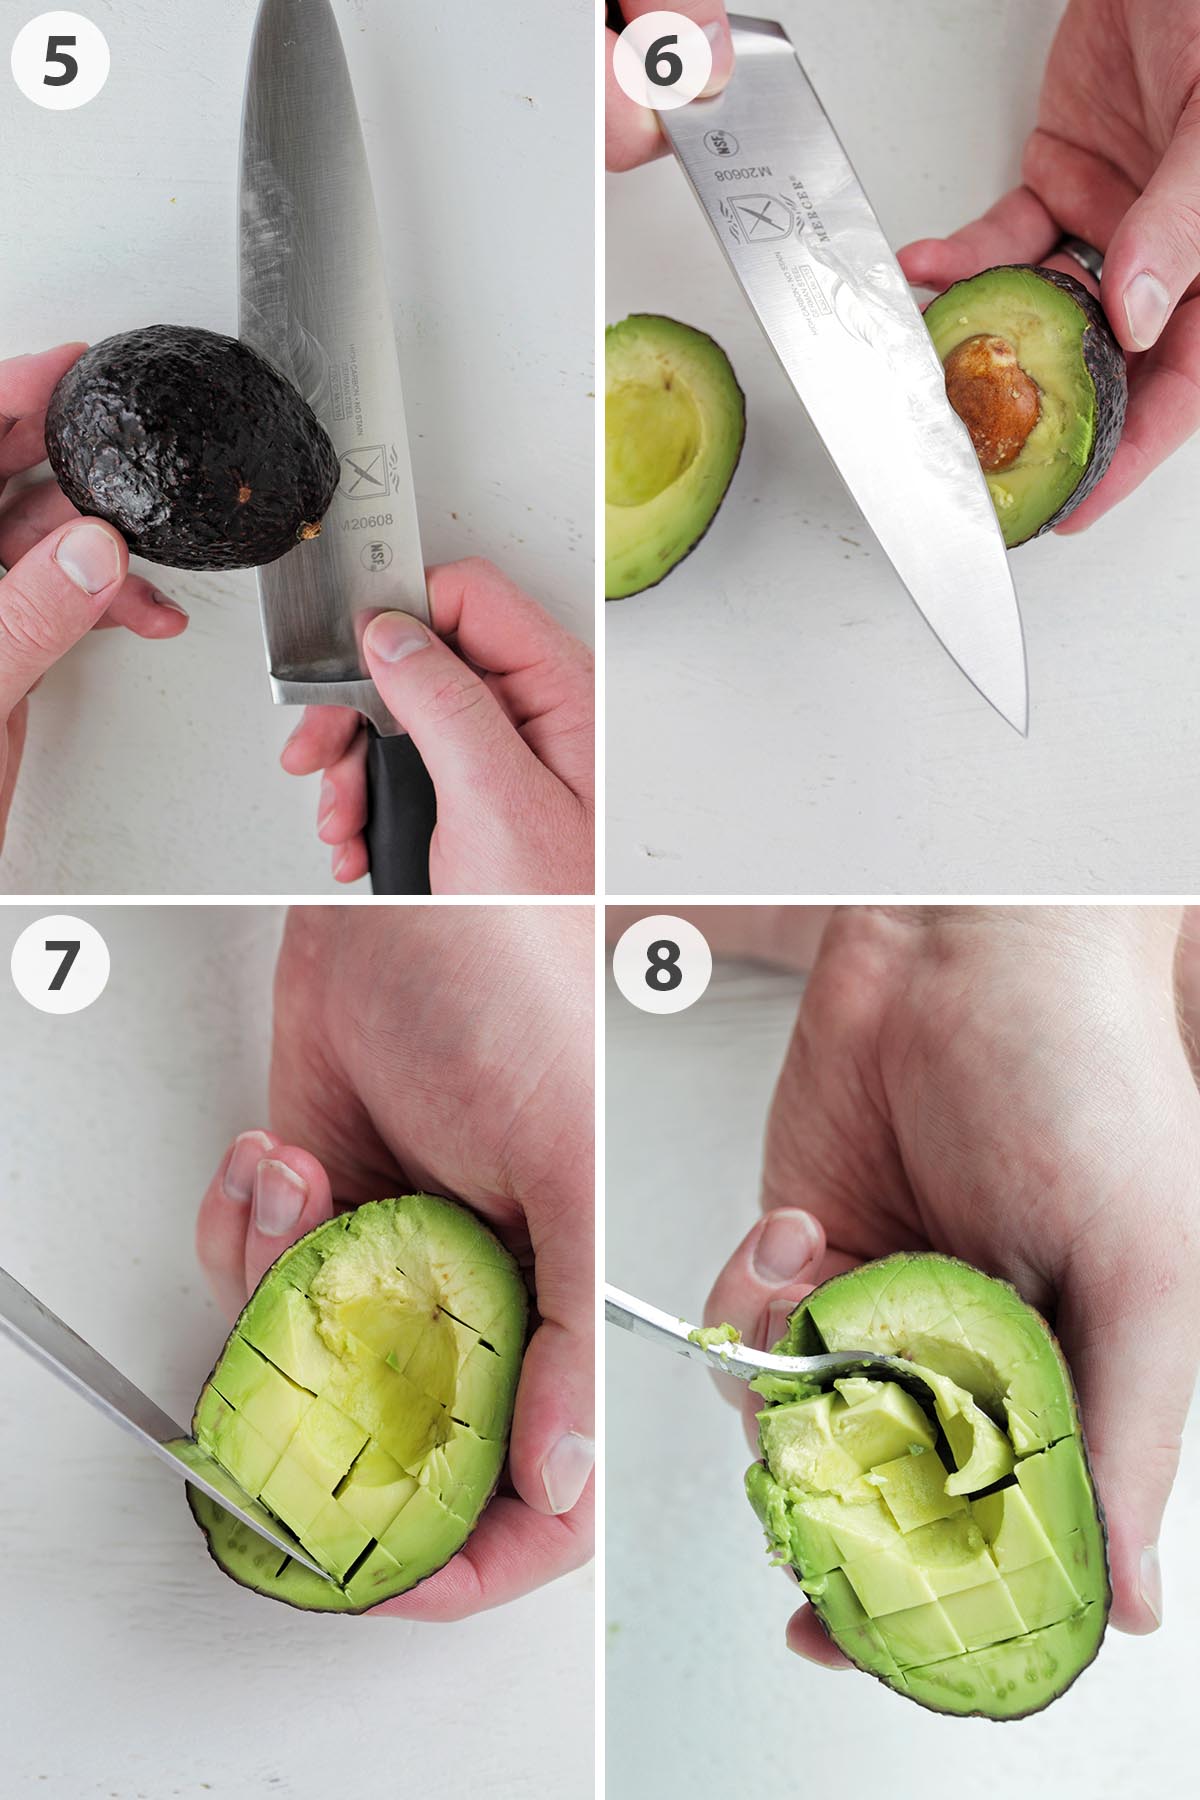 four numbered photos showing how to cut and cube an avocado.